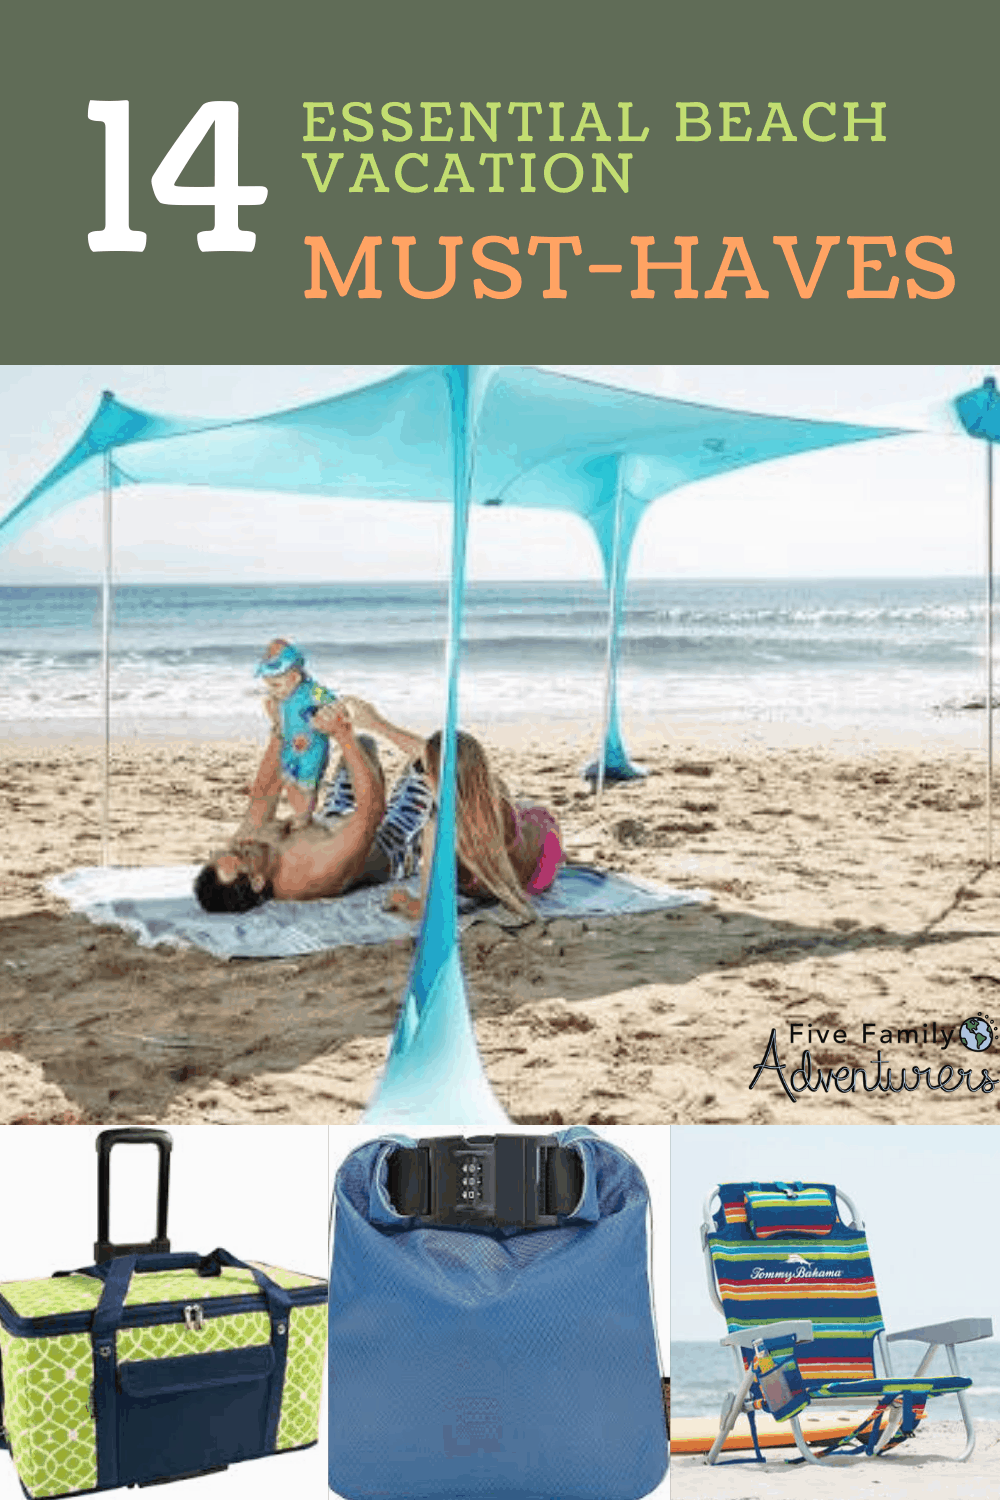 14 Essential Beach Vacation MustHaves Five Family Adventurers